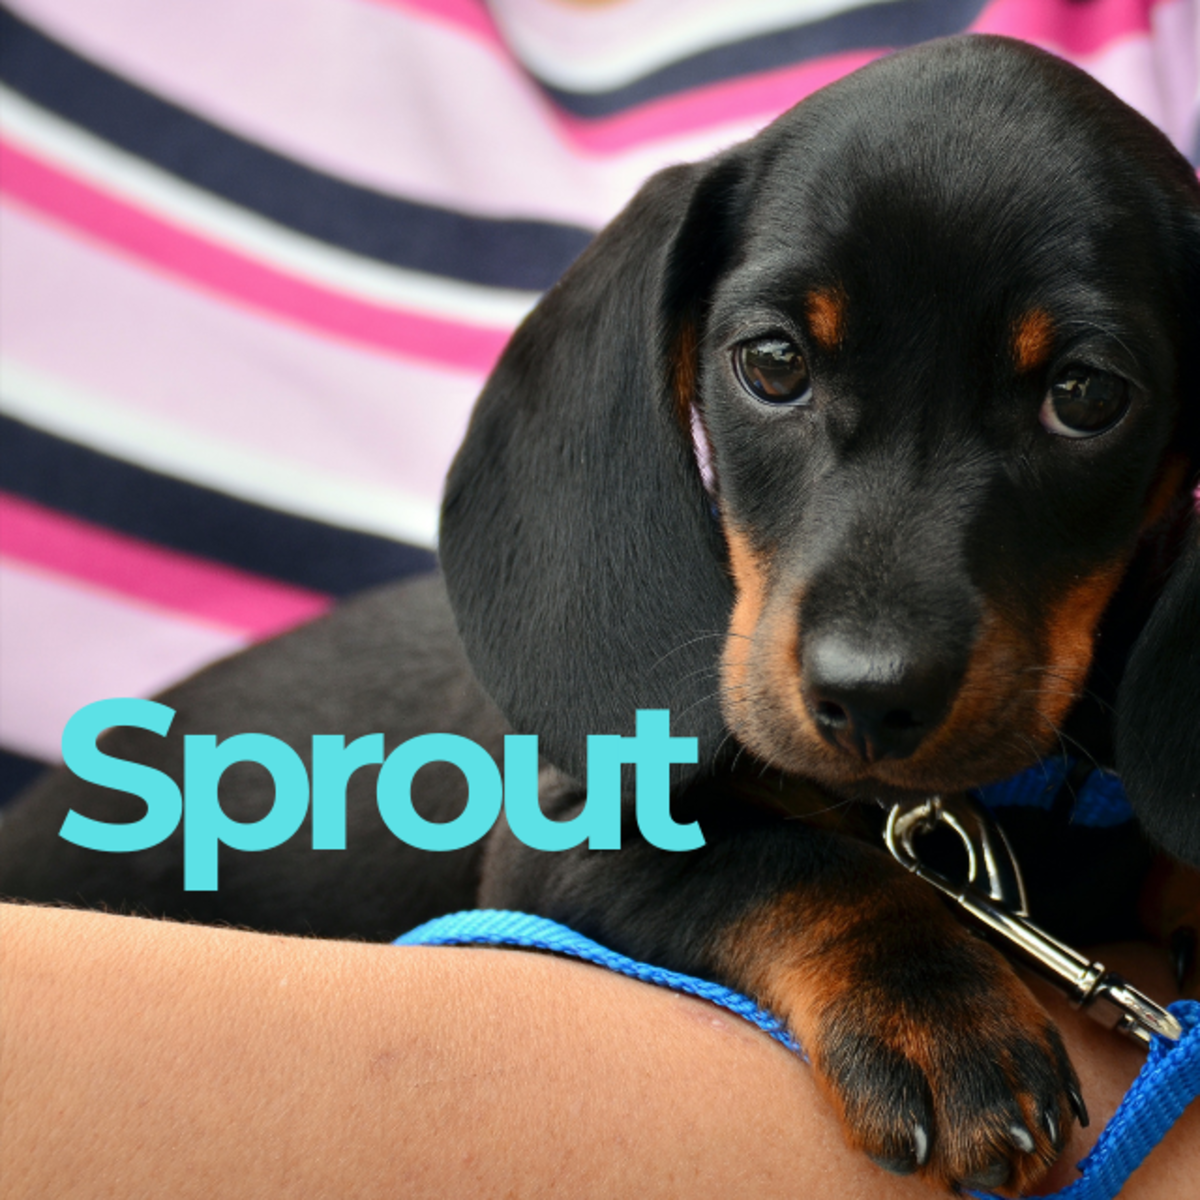 Puppy named Sprout